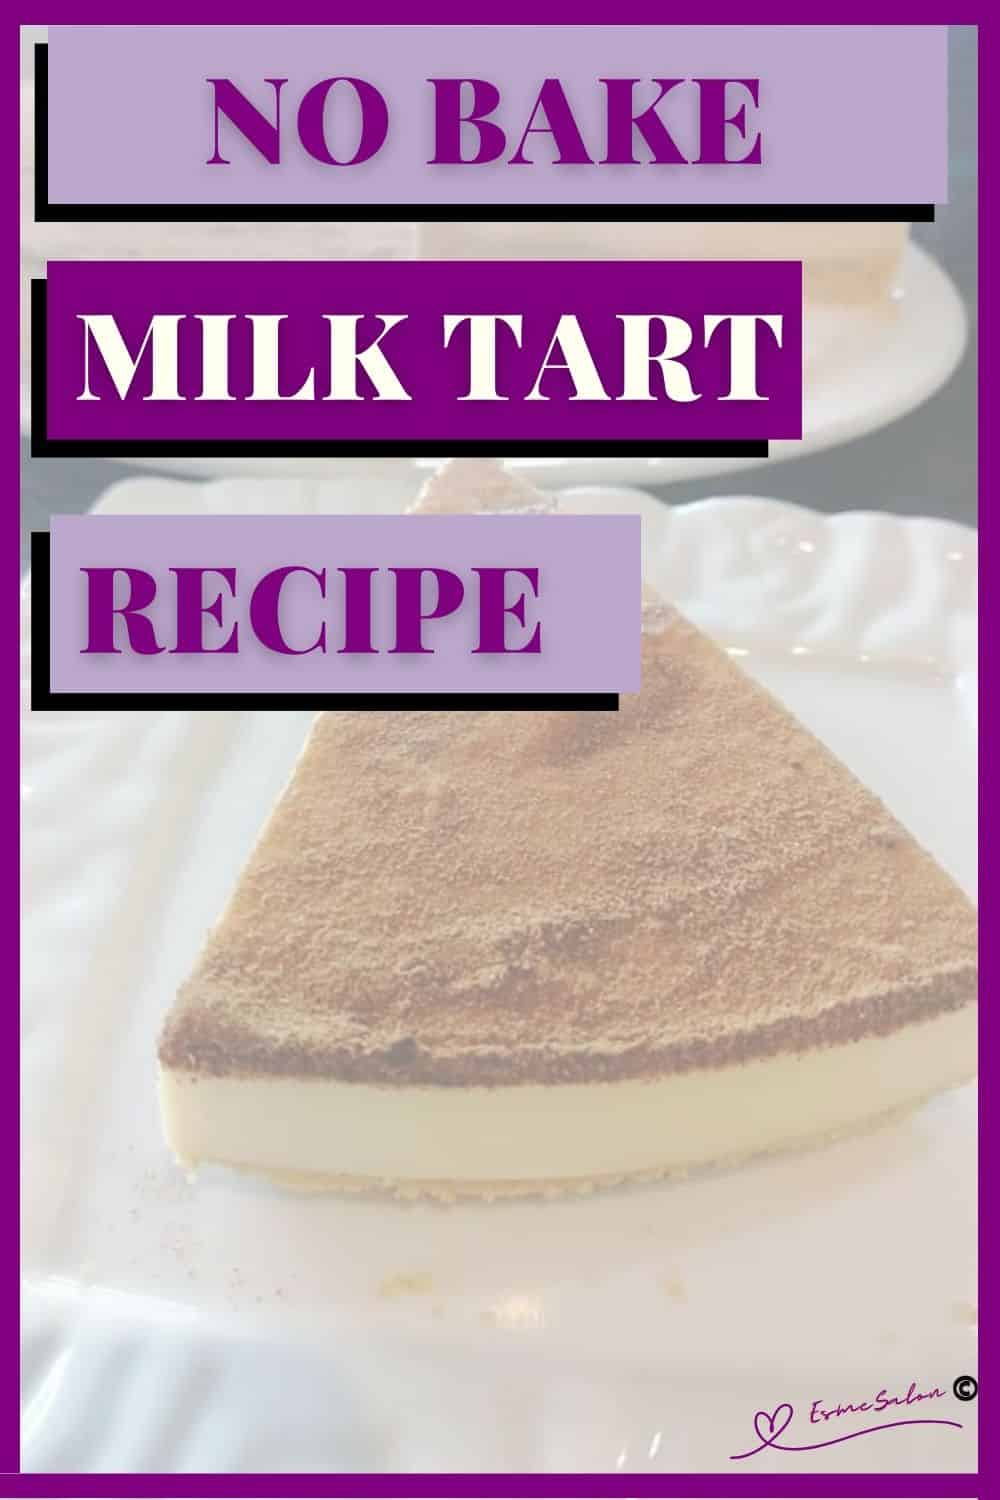 an image of a white serving plate with a slice of No Bake Milk Tart dusted with cinnamon